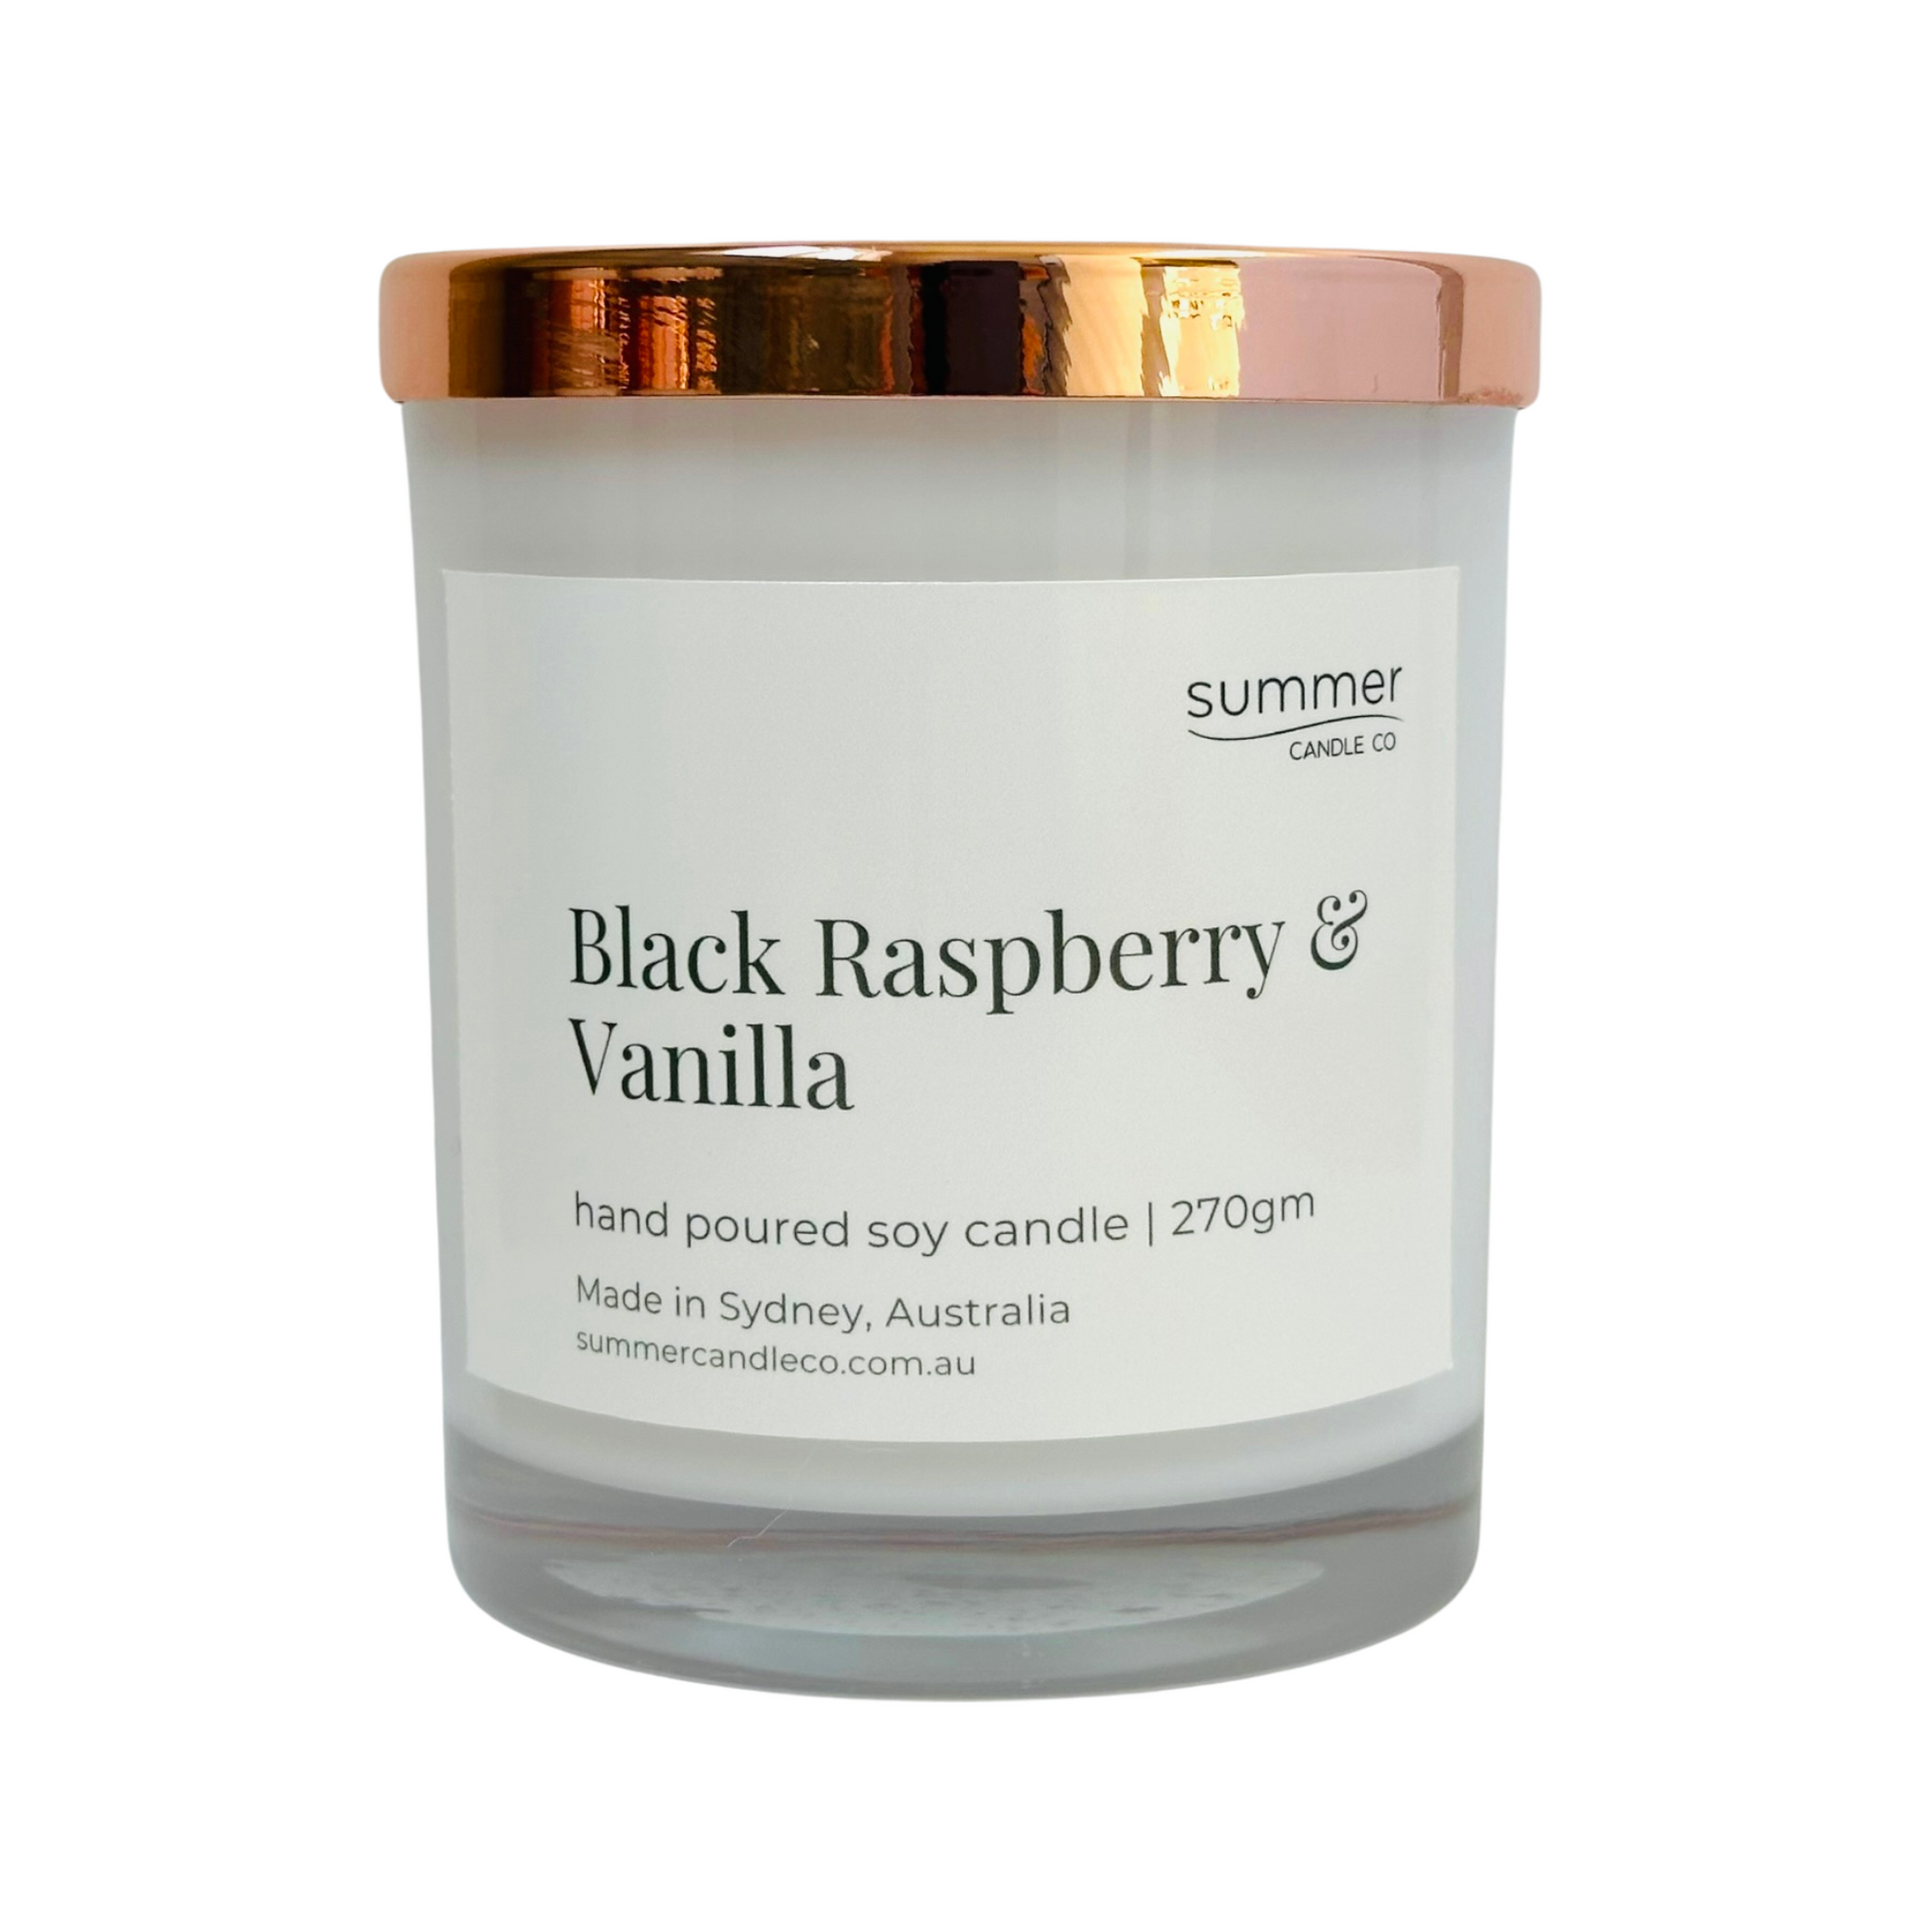 Lovely Hand Poured Soy Candle 270gram Fragrance of Black Raspberry & Vanilla